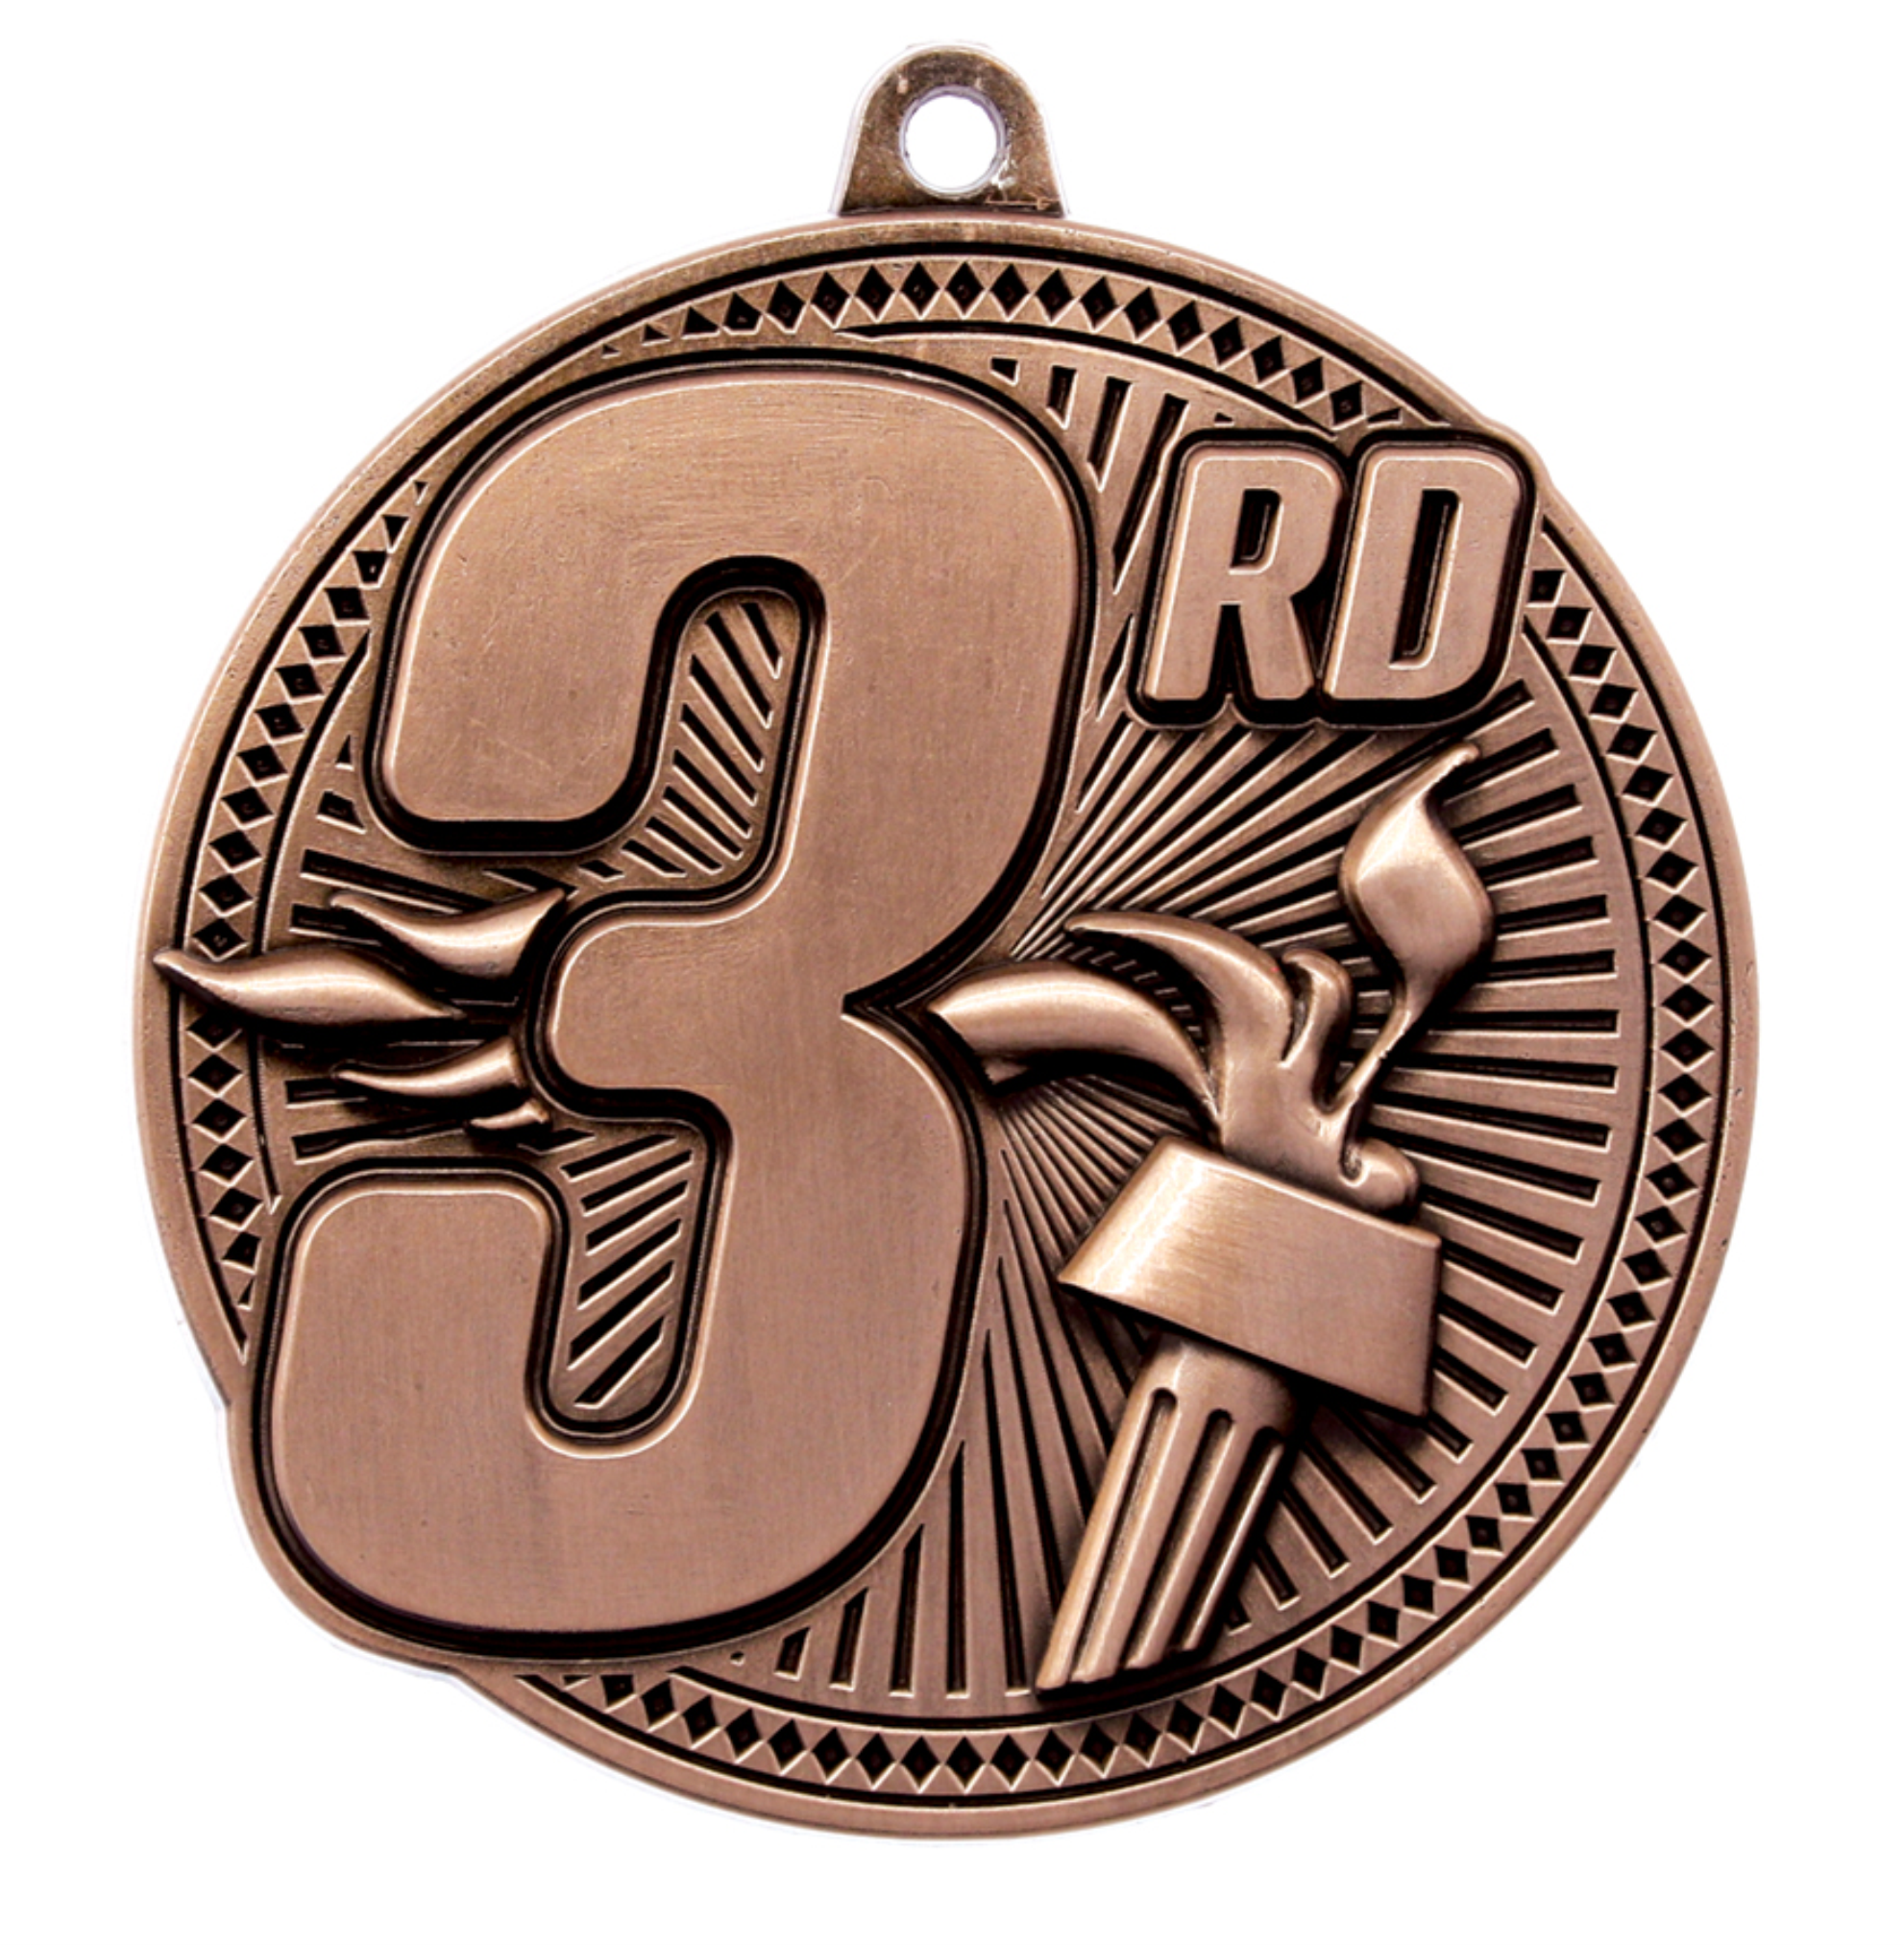 Sport Medals - Qualified Position - Tempo Series MSK91